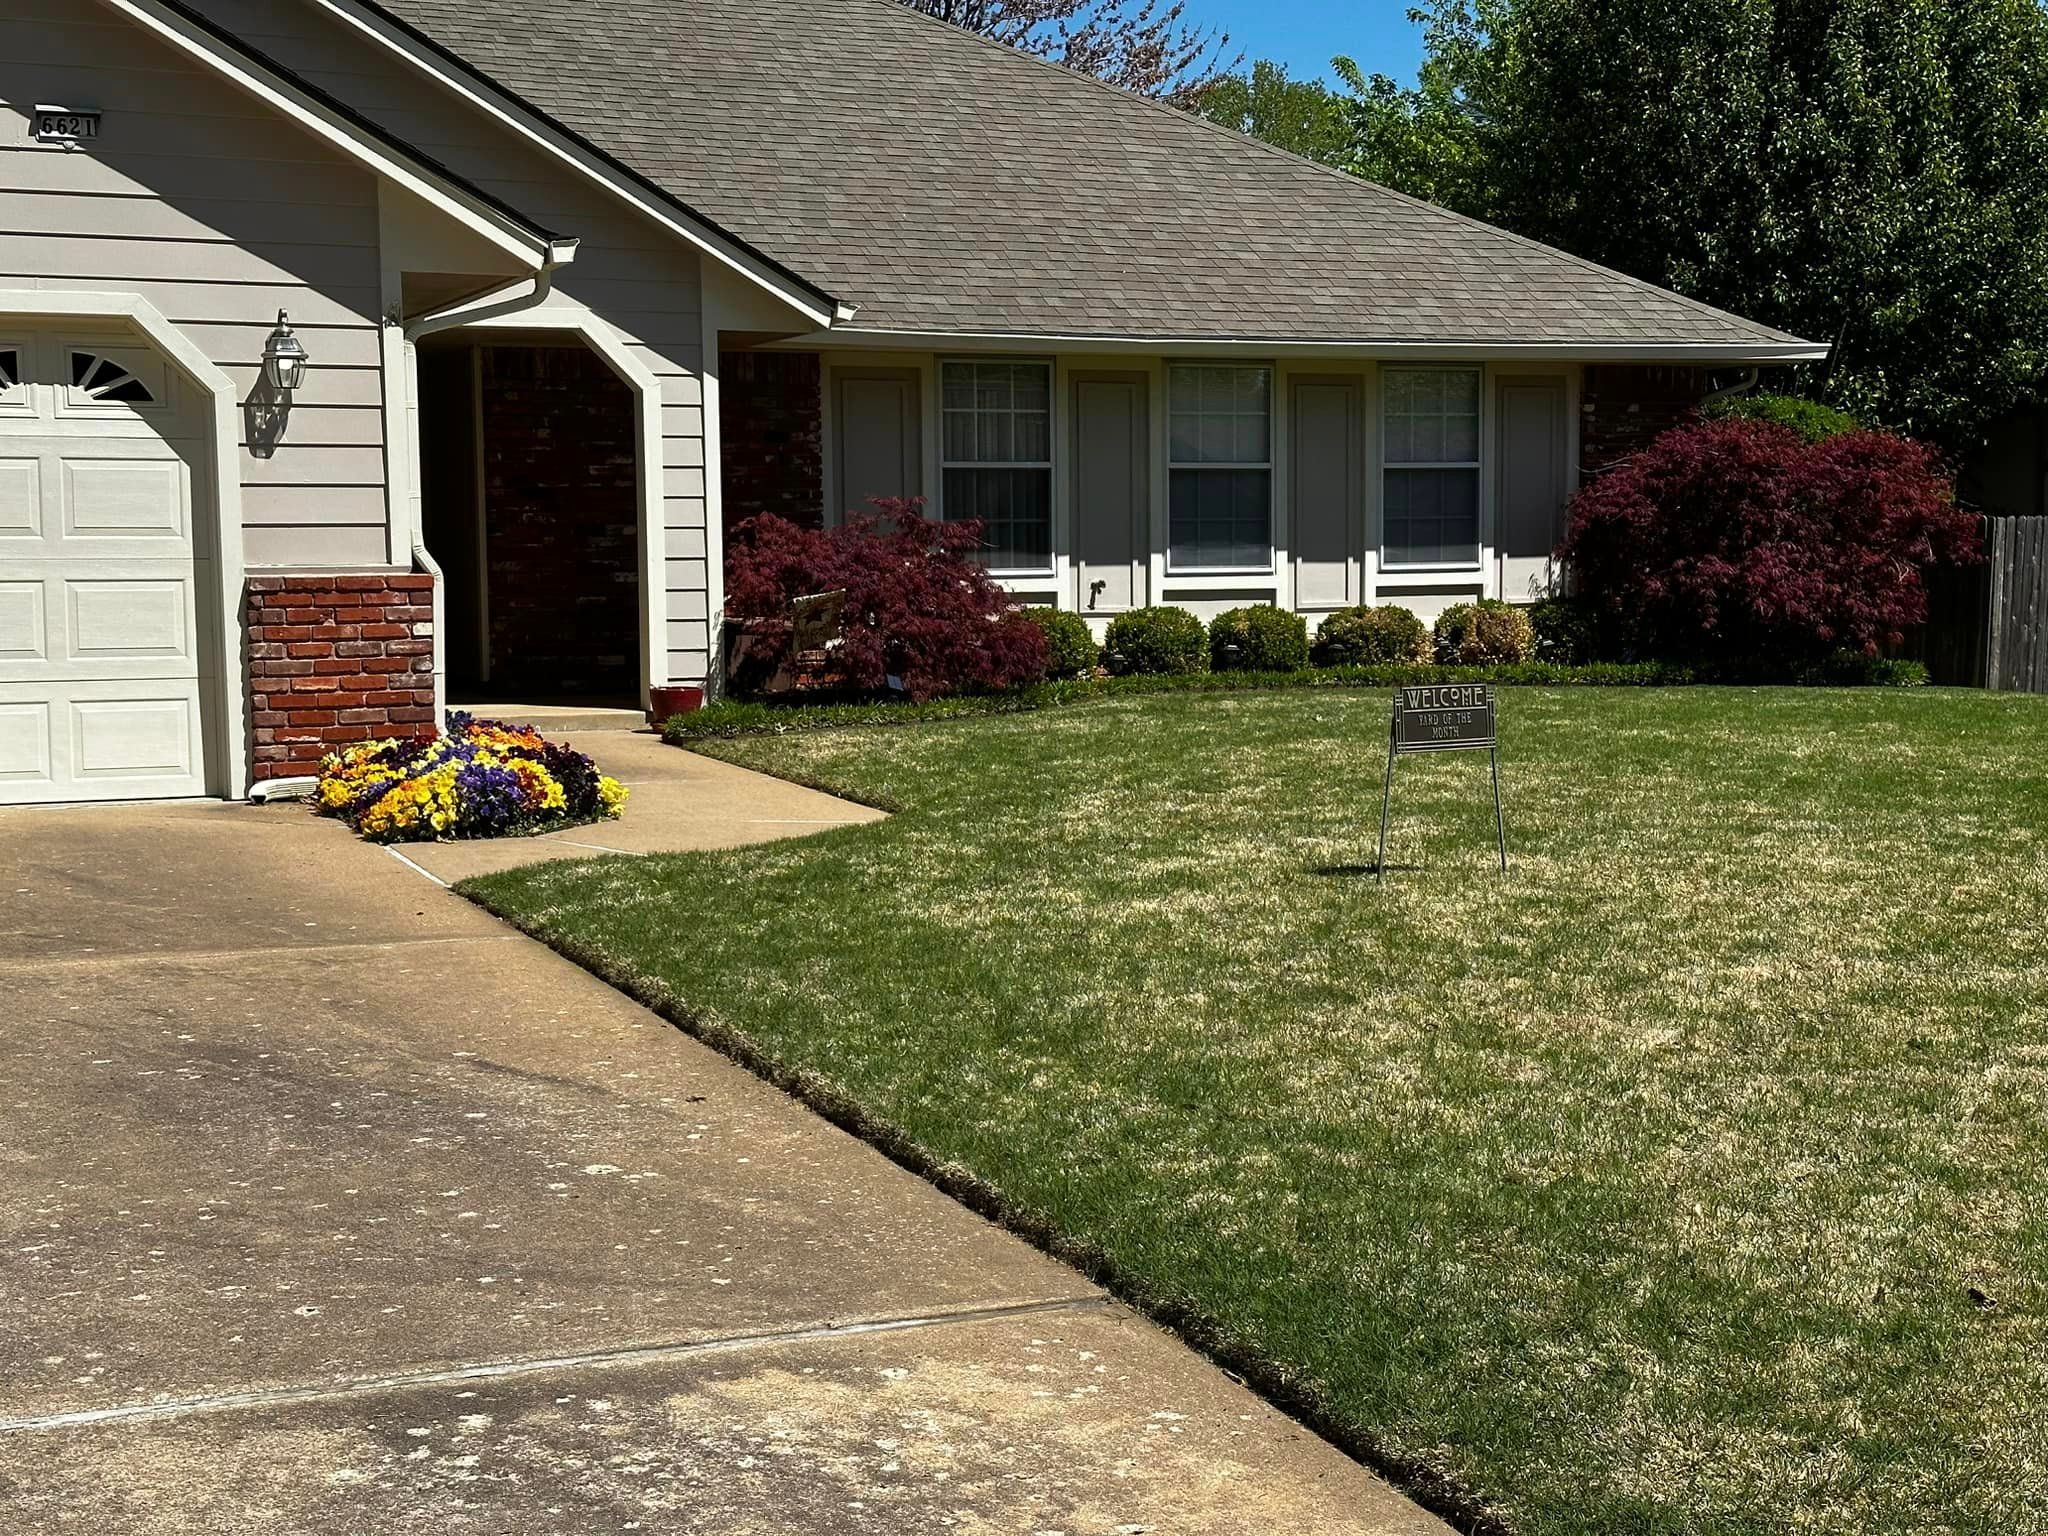 Landscaping for Lawn Dogs Outdoors Services in Sand Springs, OK